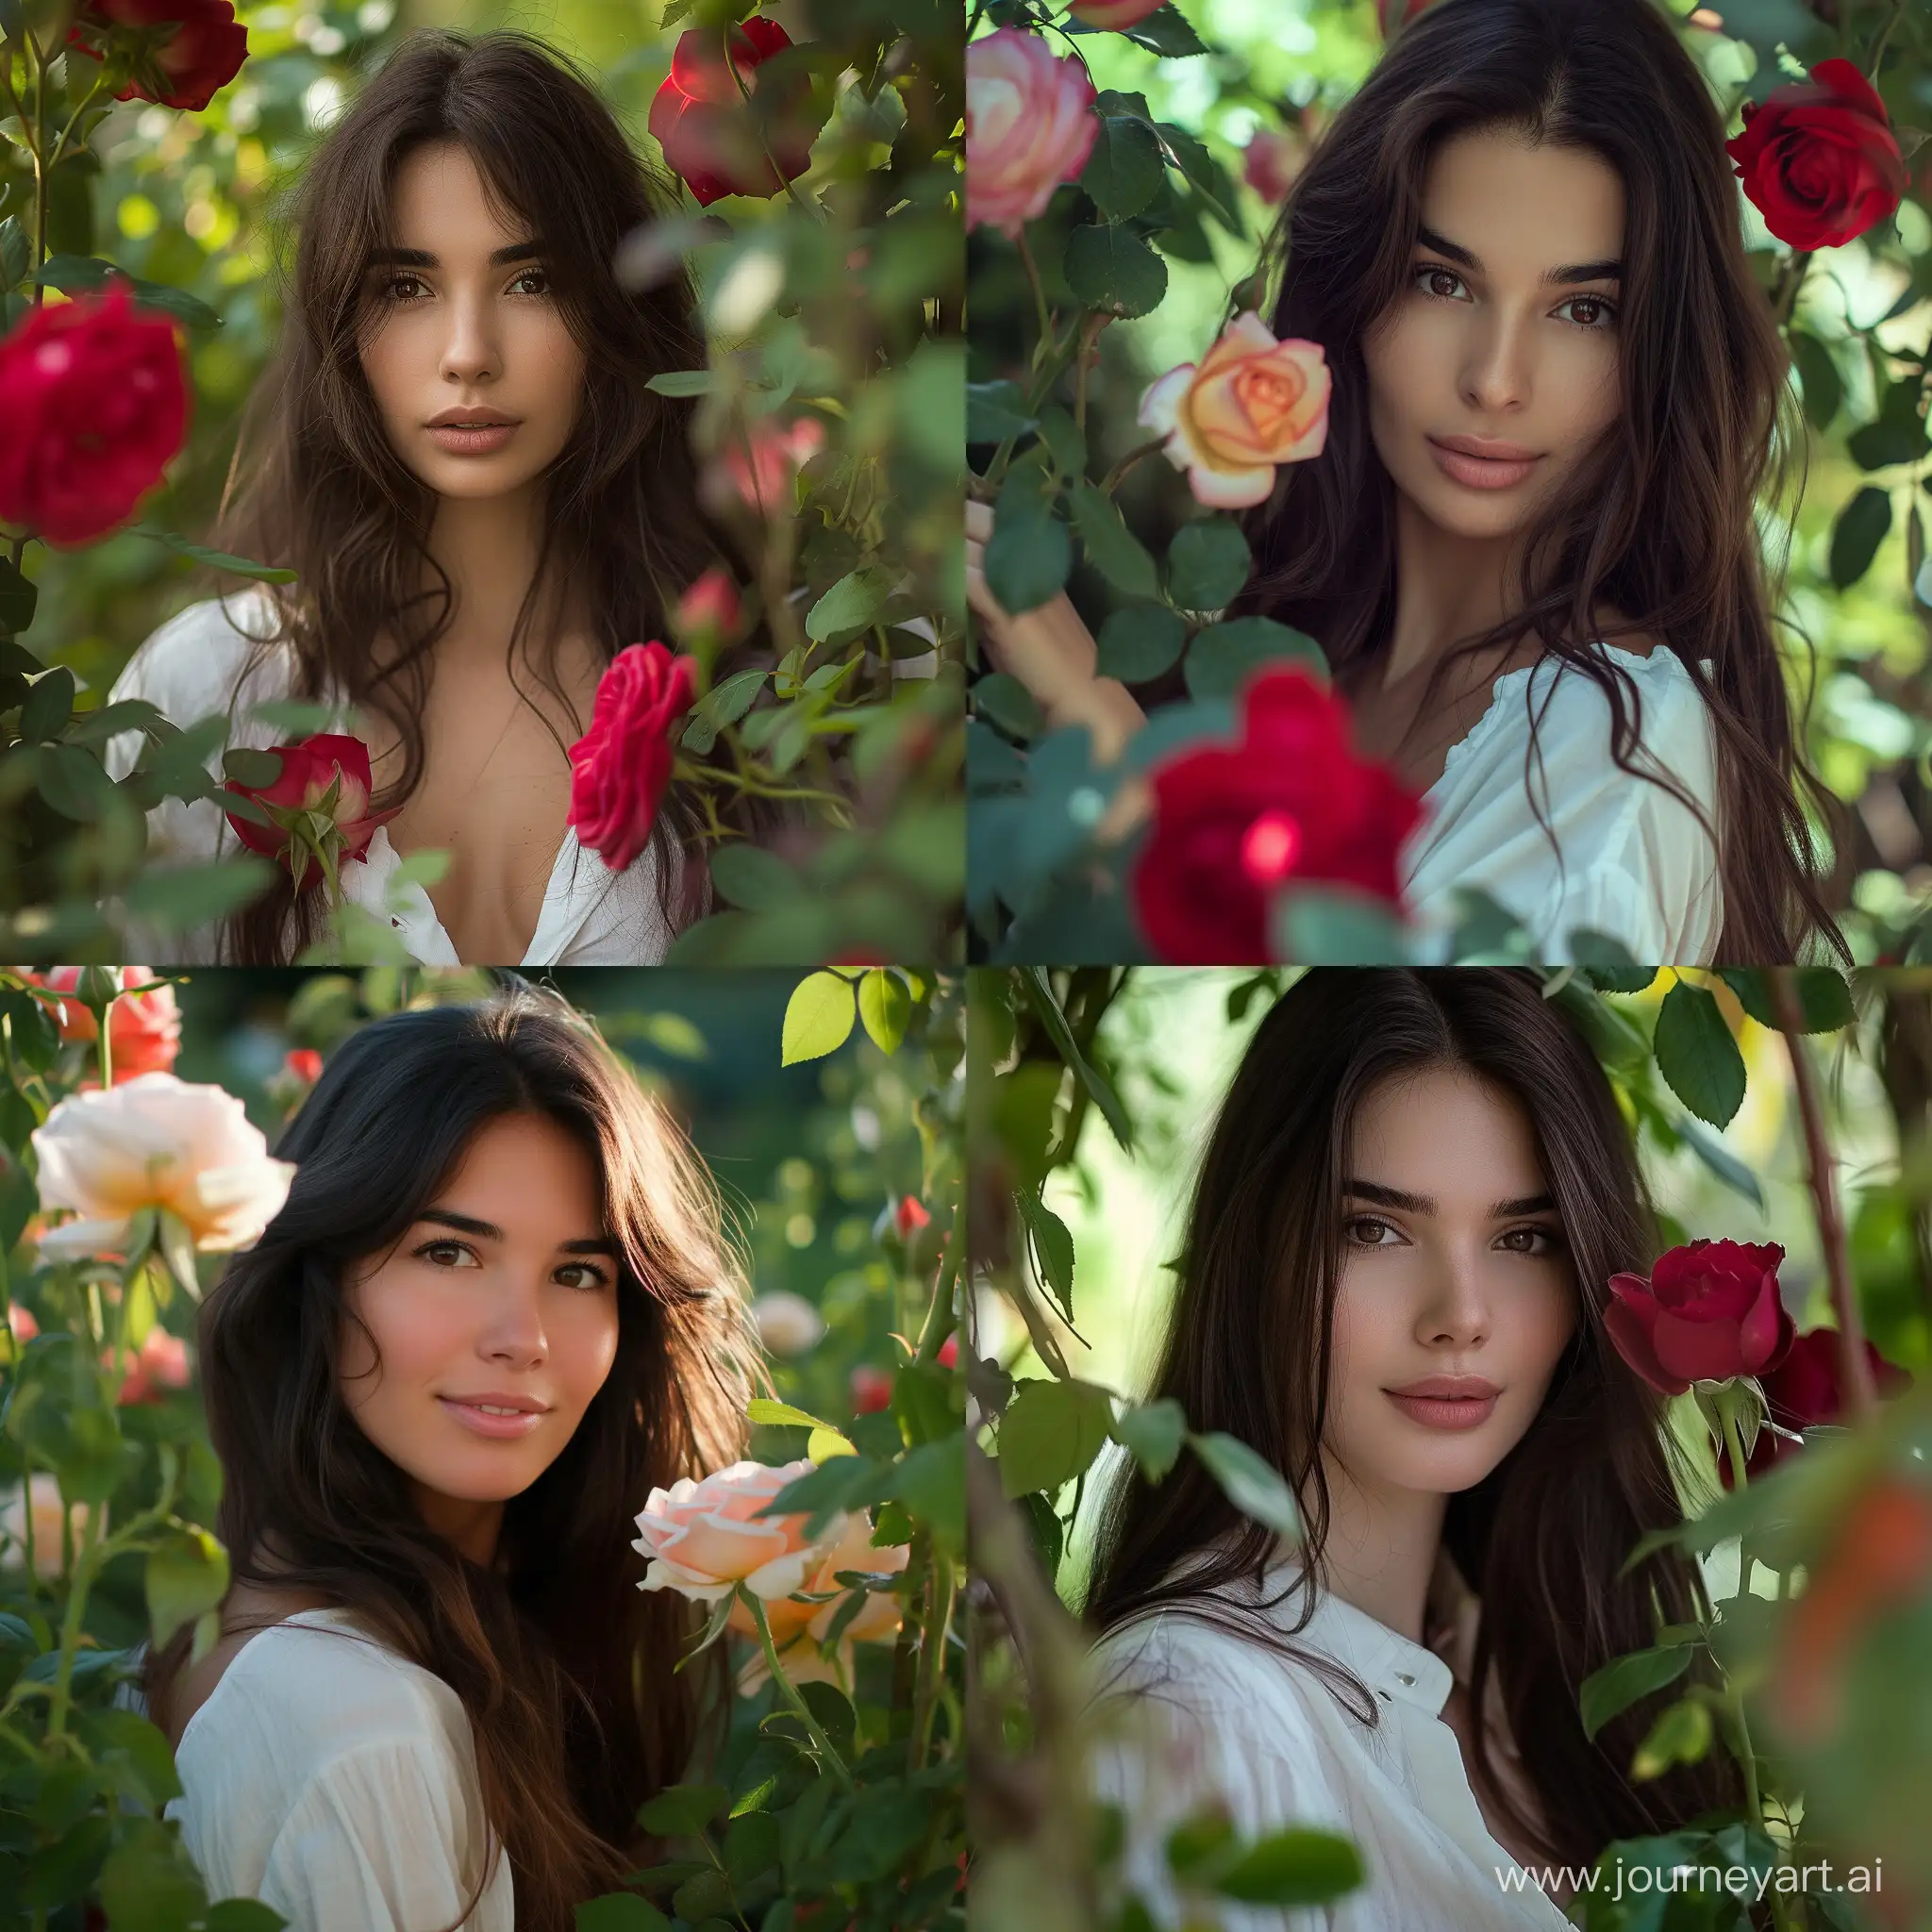 happy valentines day, a  beautiful women, she's standing between rose flowers, dark long brown hair, brown eyes, a little smile on her face , high detailed photo, portrait, a hot white shirt, garden background